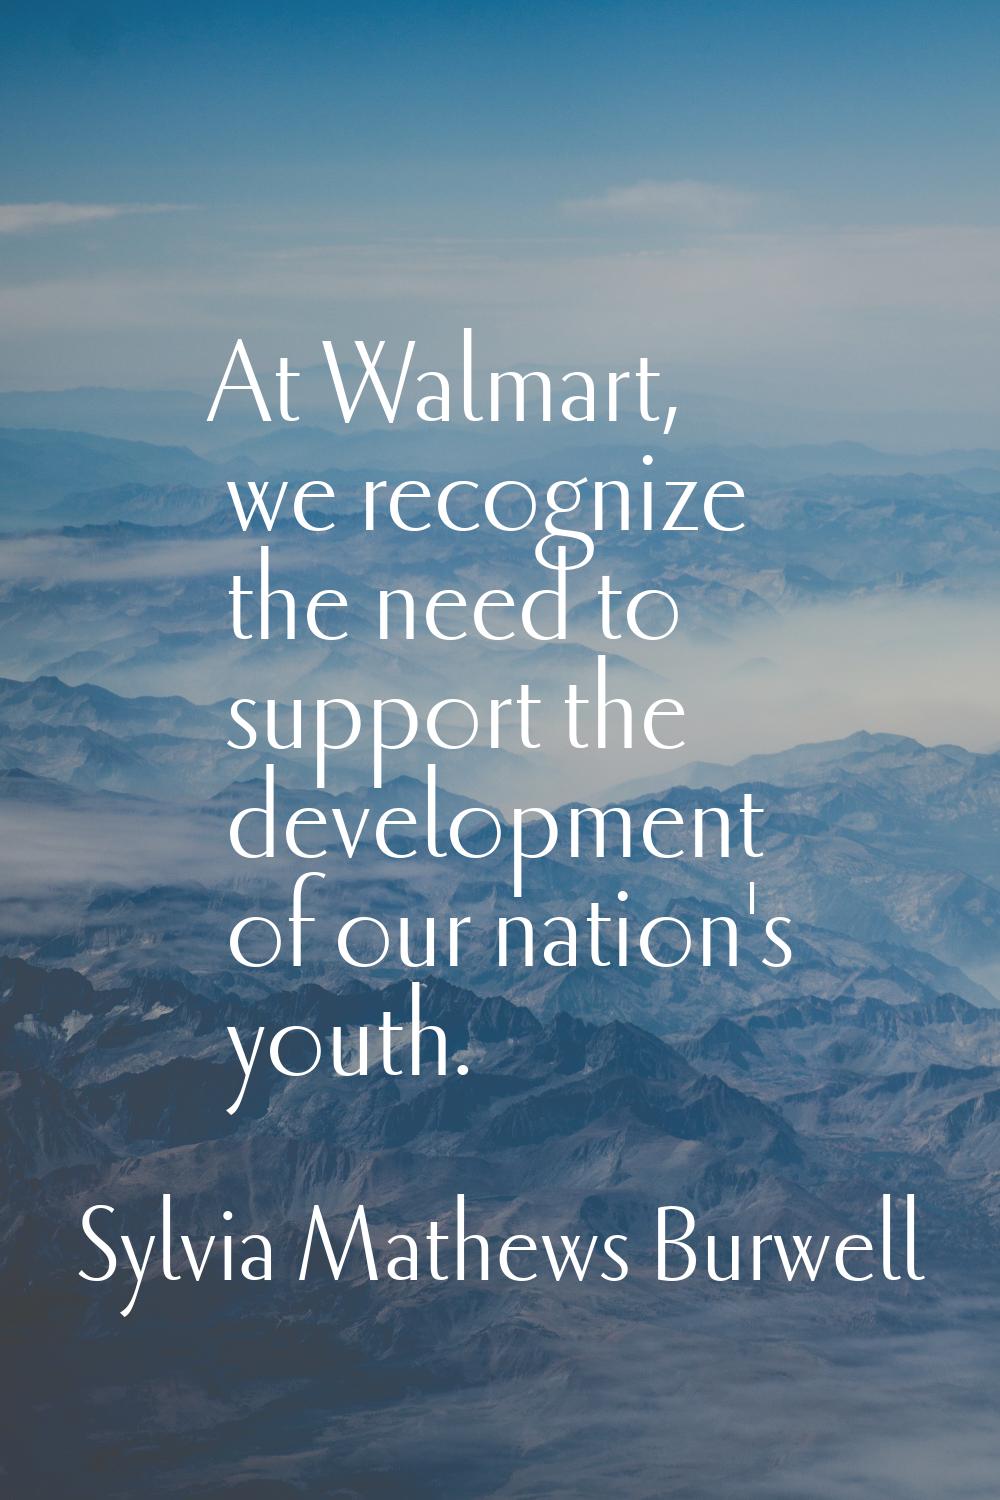 At Walmart, we recognize the need to support the development of our nation's youth.